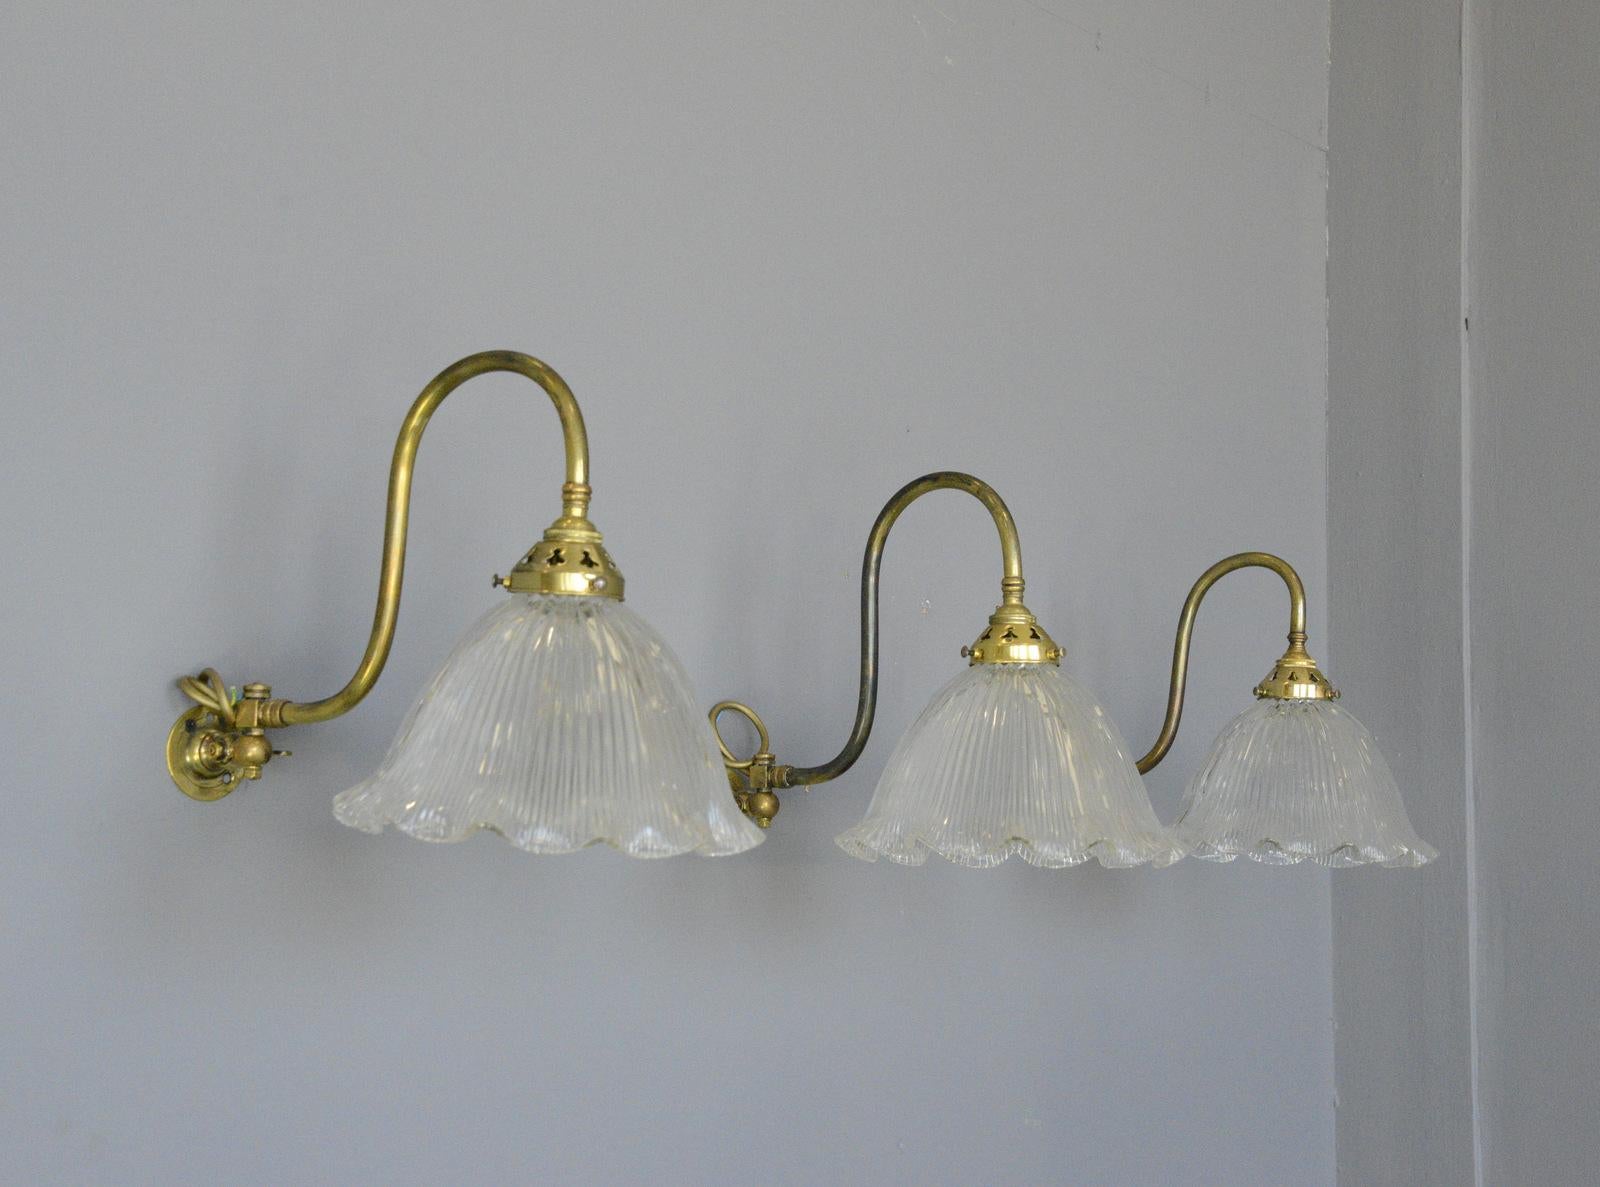 Brass Articulated Wall Sconces by Holophane, circa 1910